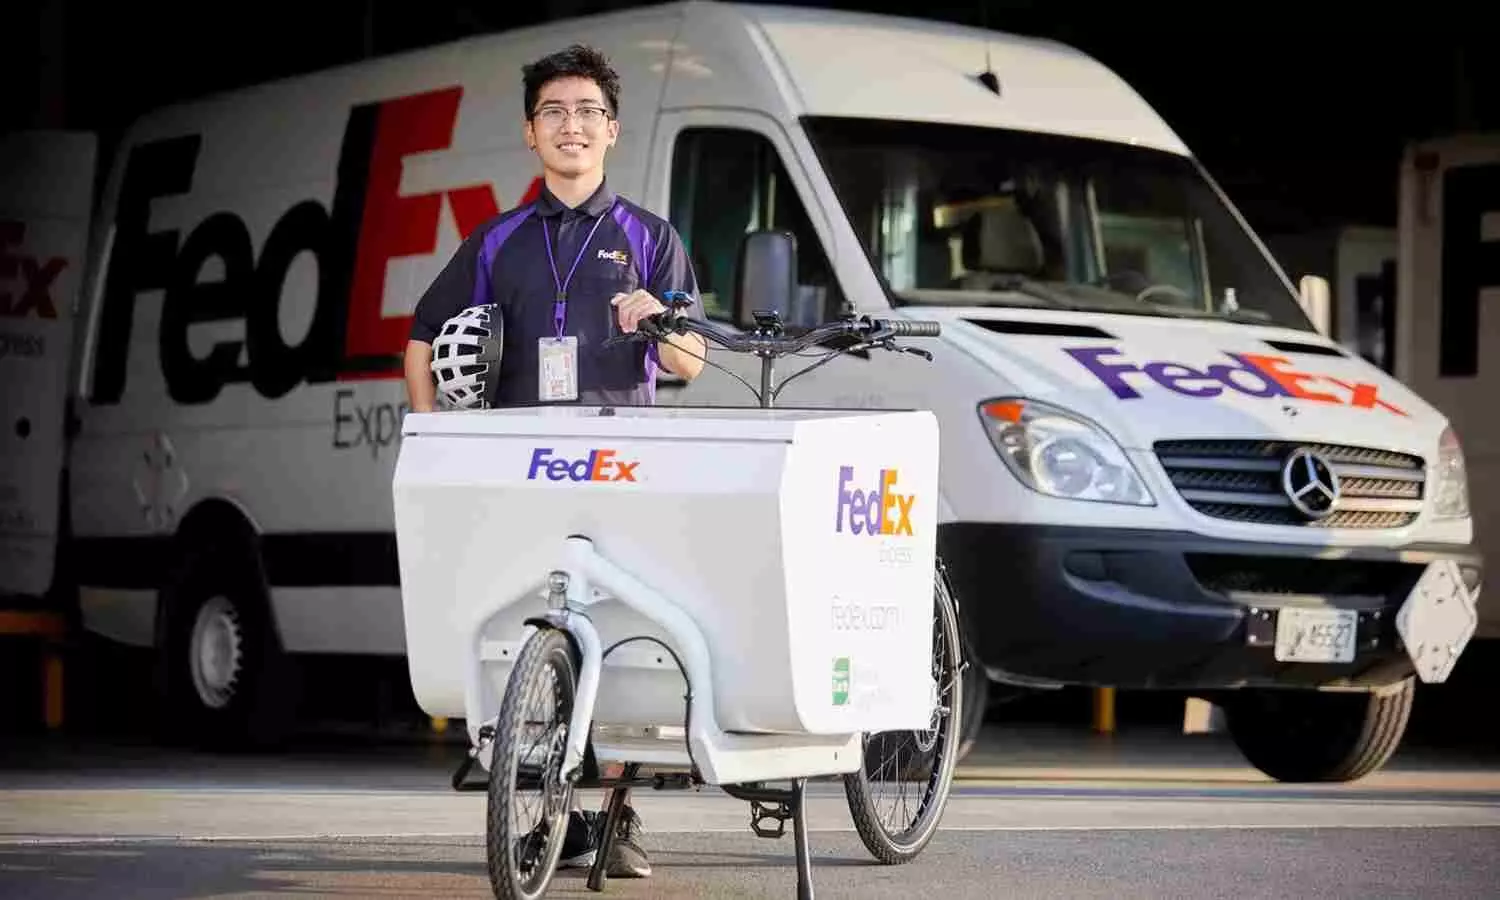 Sustainability is important in eCommerce: FedEx research